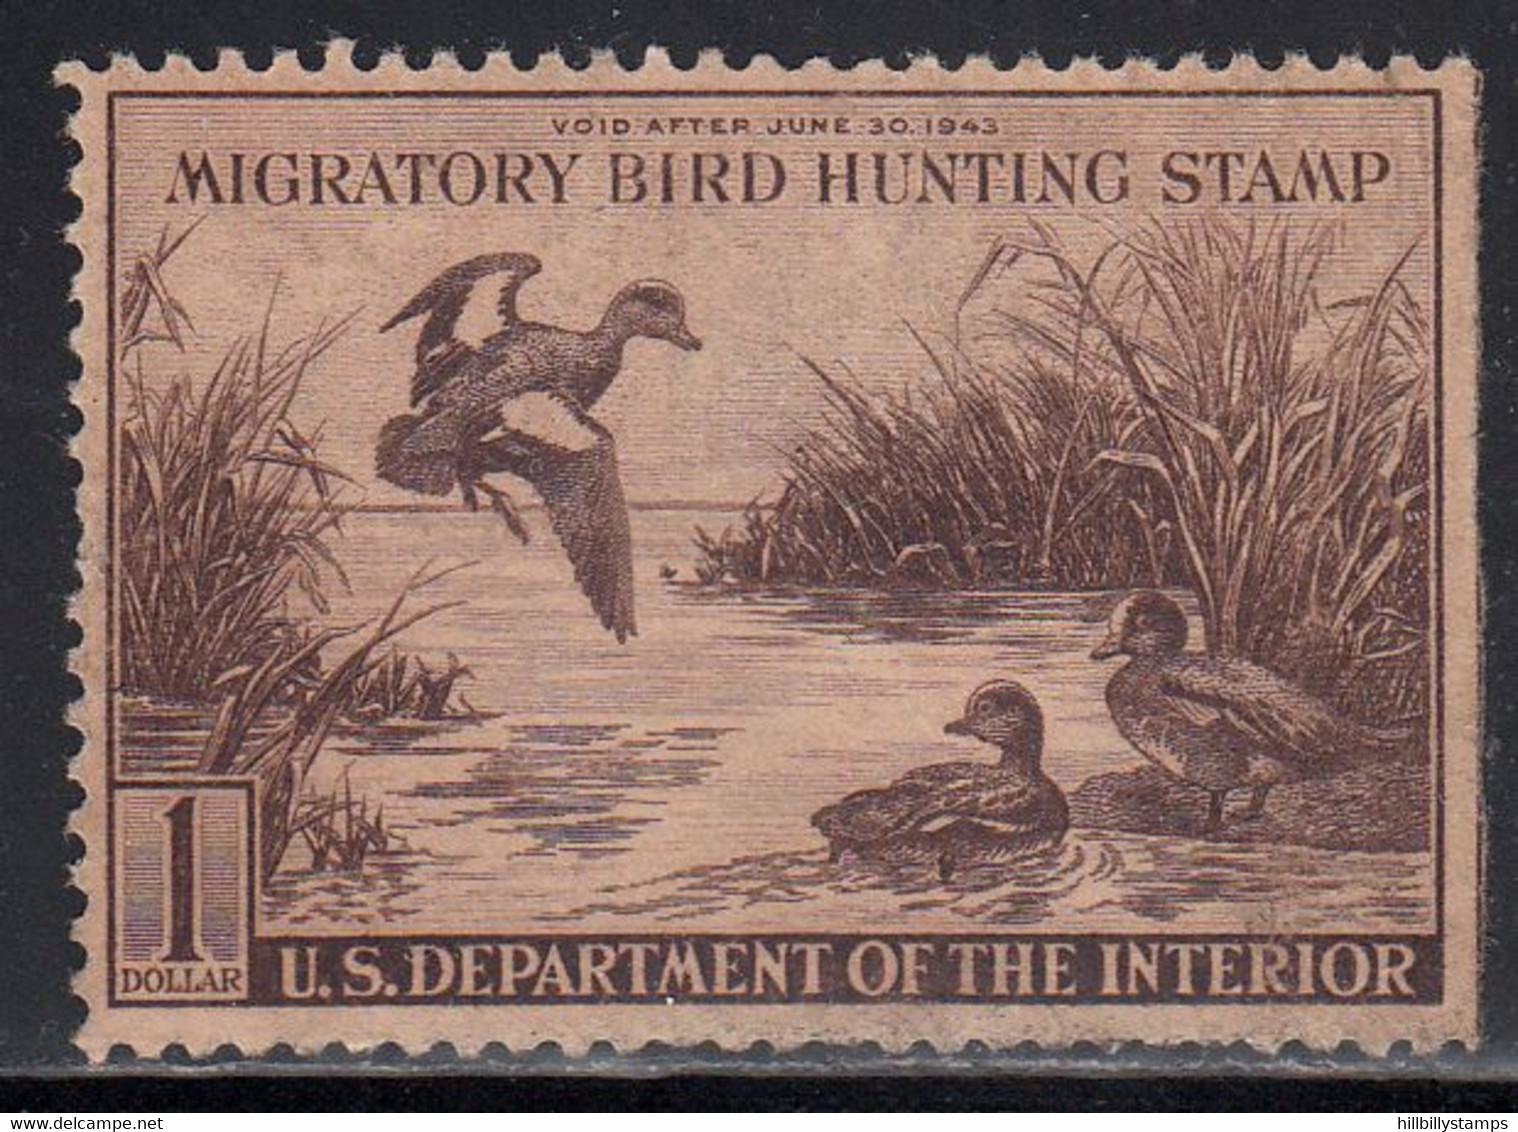 UNITED STATES   SCOTT NO  RW9    USED     YEAR  1942  STRAIGHT EDGE--DISCOUNTED IN PRICE - Duck Stamps